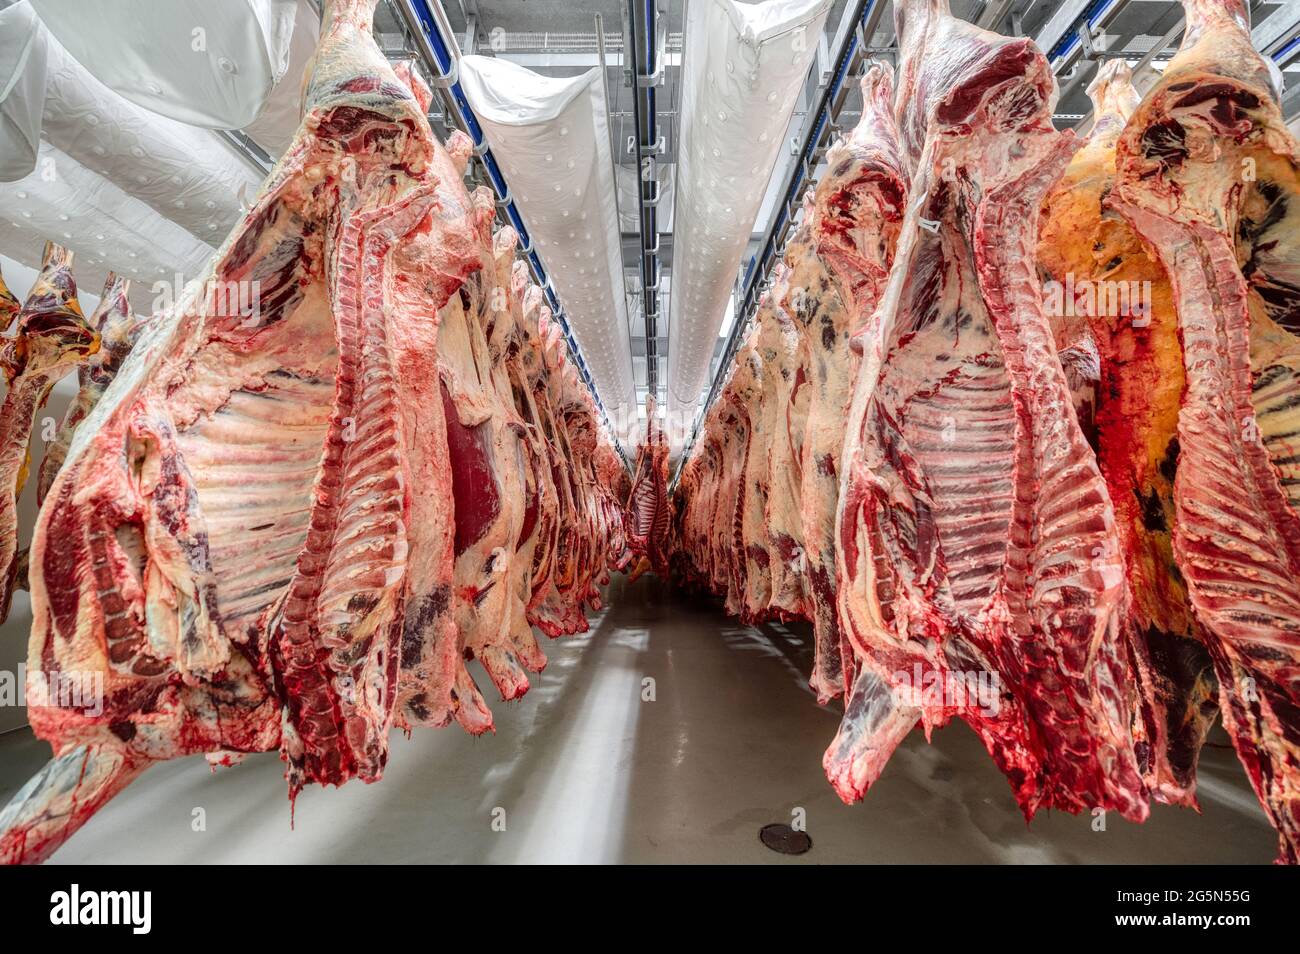 Cold storage room for meat, pork carcasses hanging in freezer. Stock Photo  by ©grigvovan 132635316